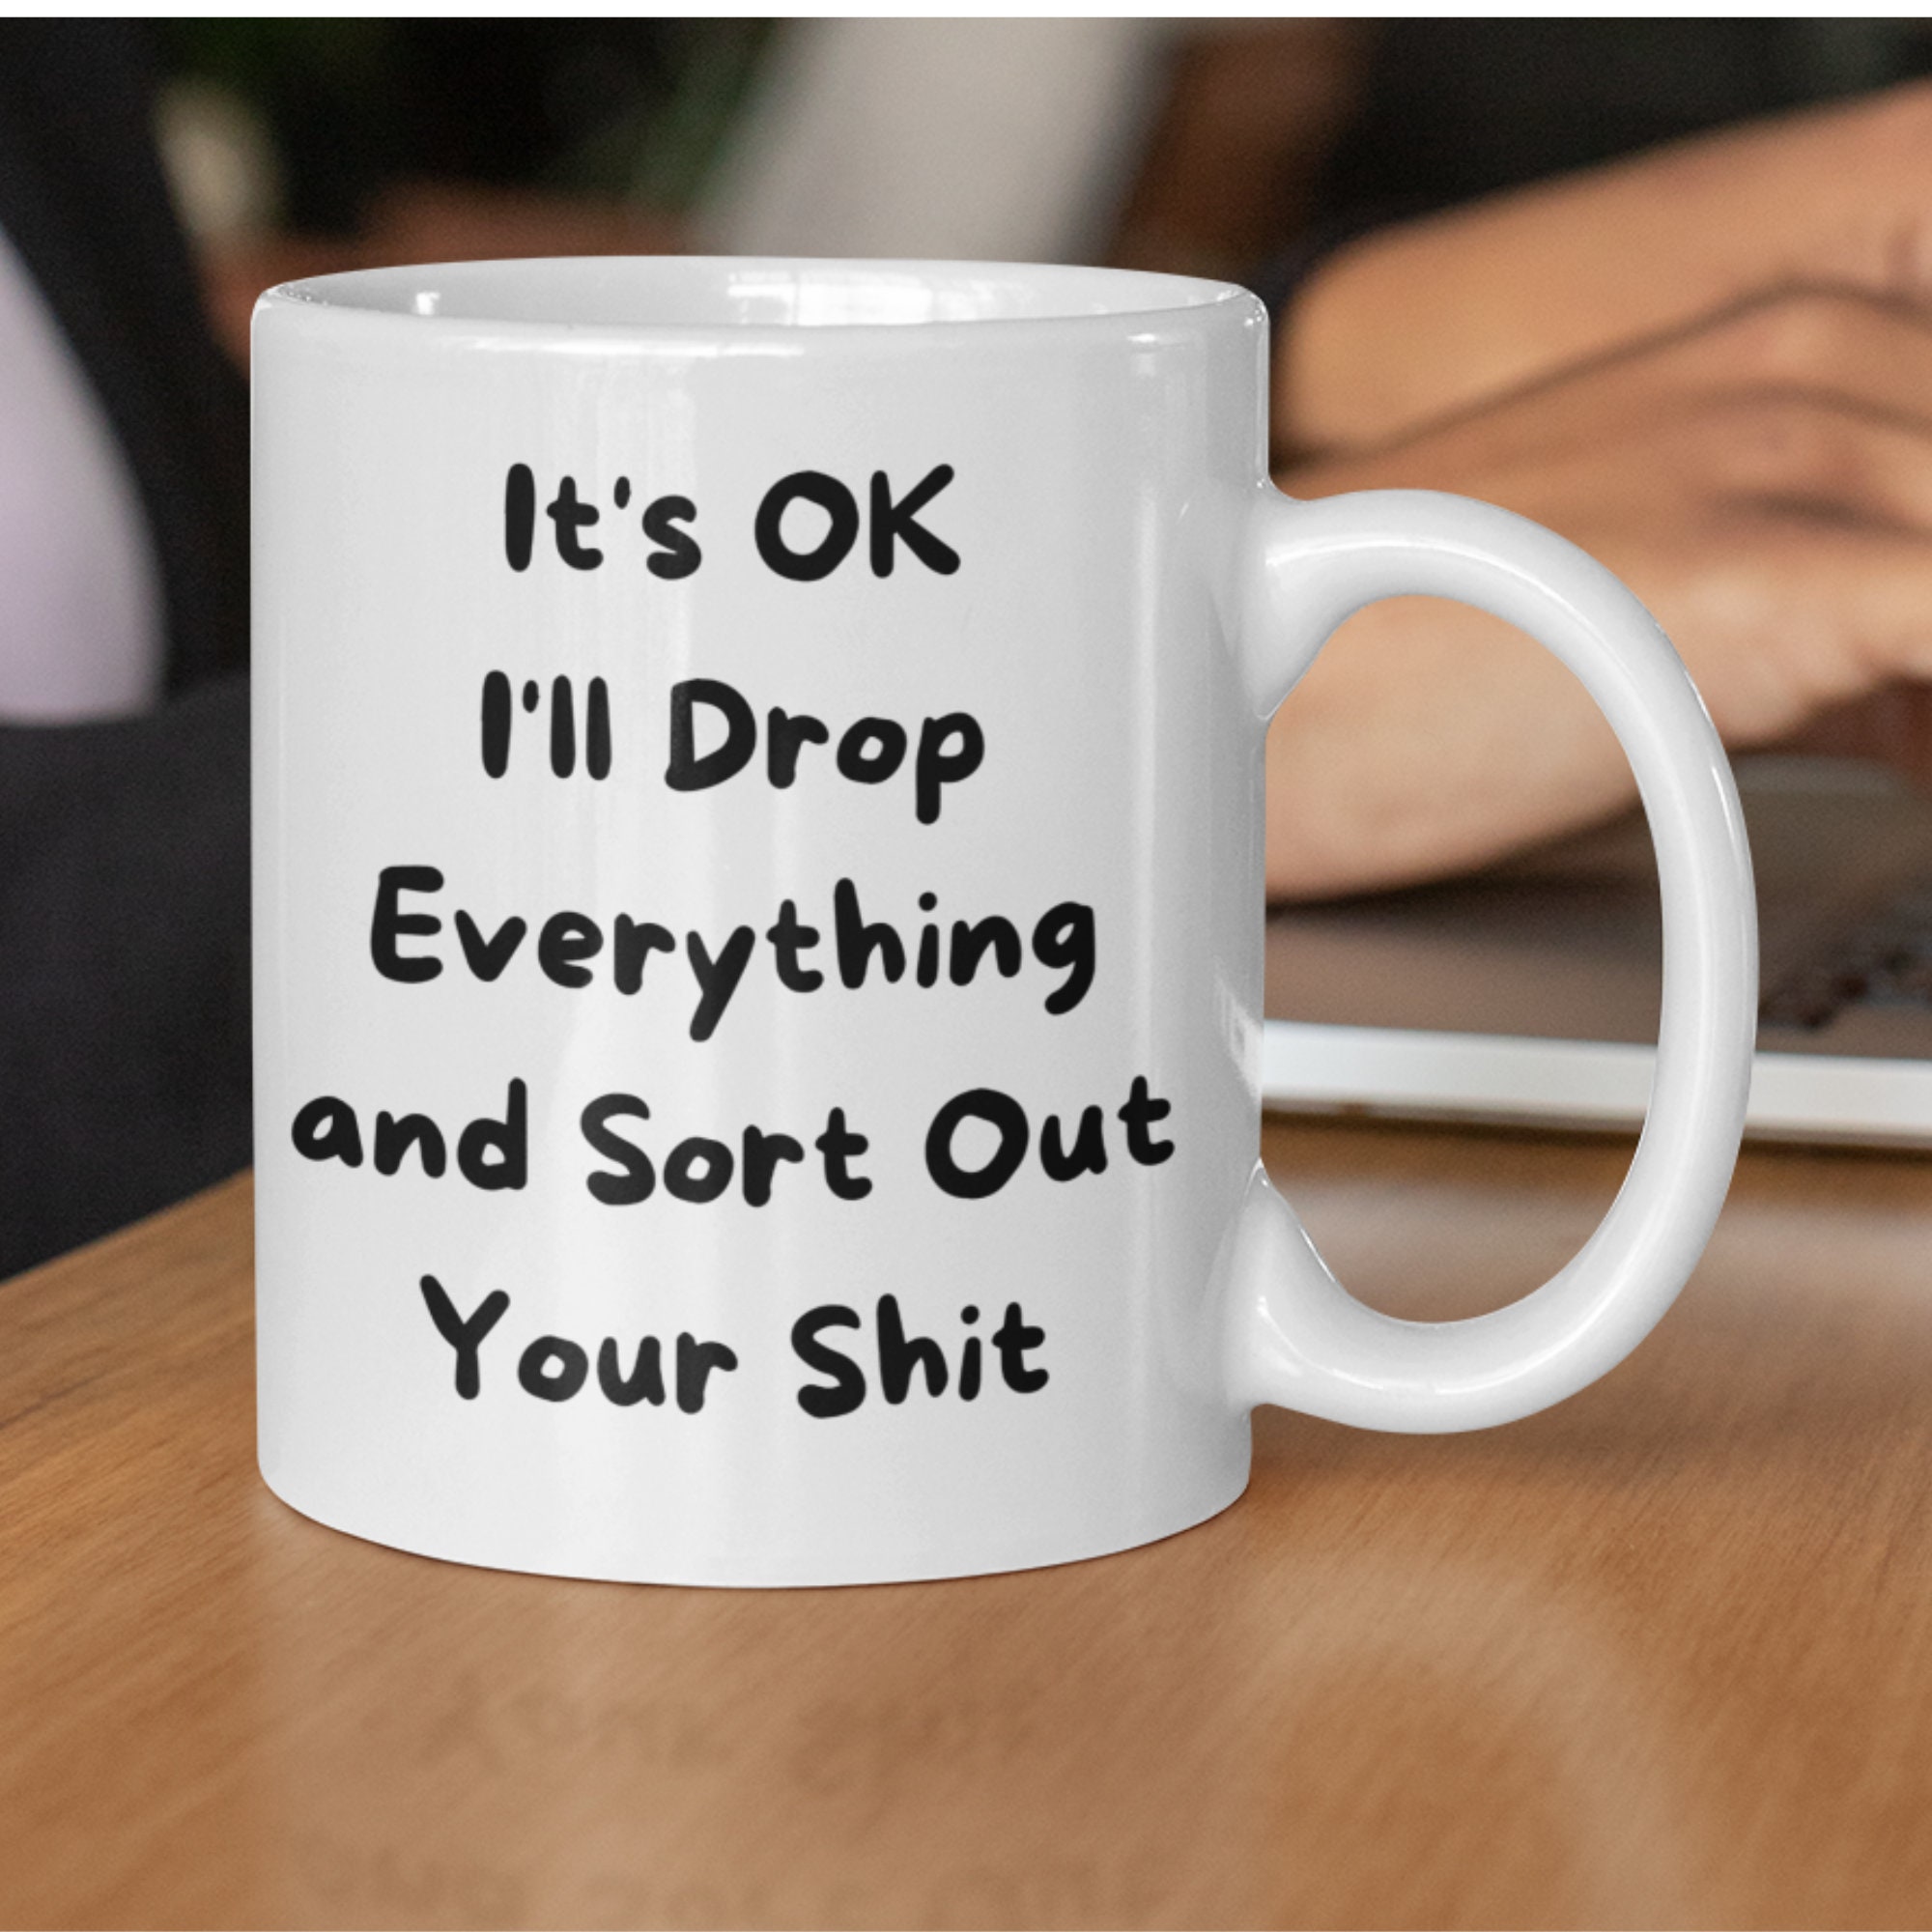 Tattoo Artist Gifts Fuck Mug, Fuck off Rude Mug Happy Retirement Quote  Swear Gifts, Going Away Gift for Coworker Colleague Mug Inappropriate 